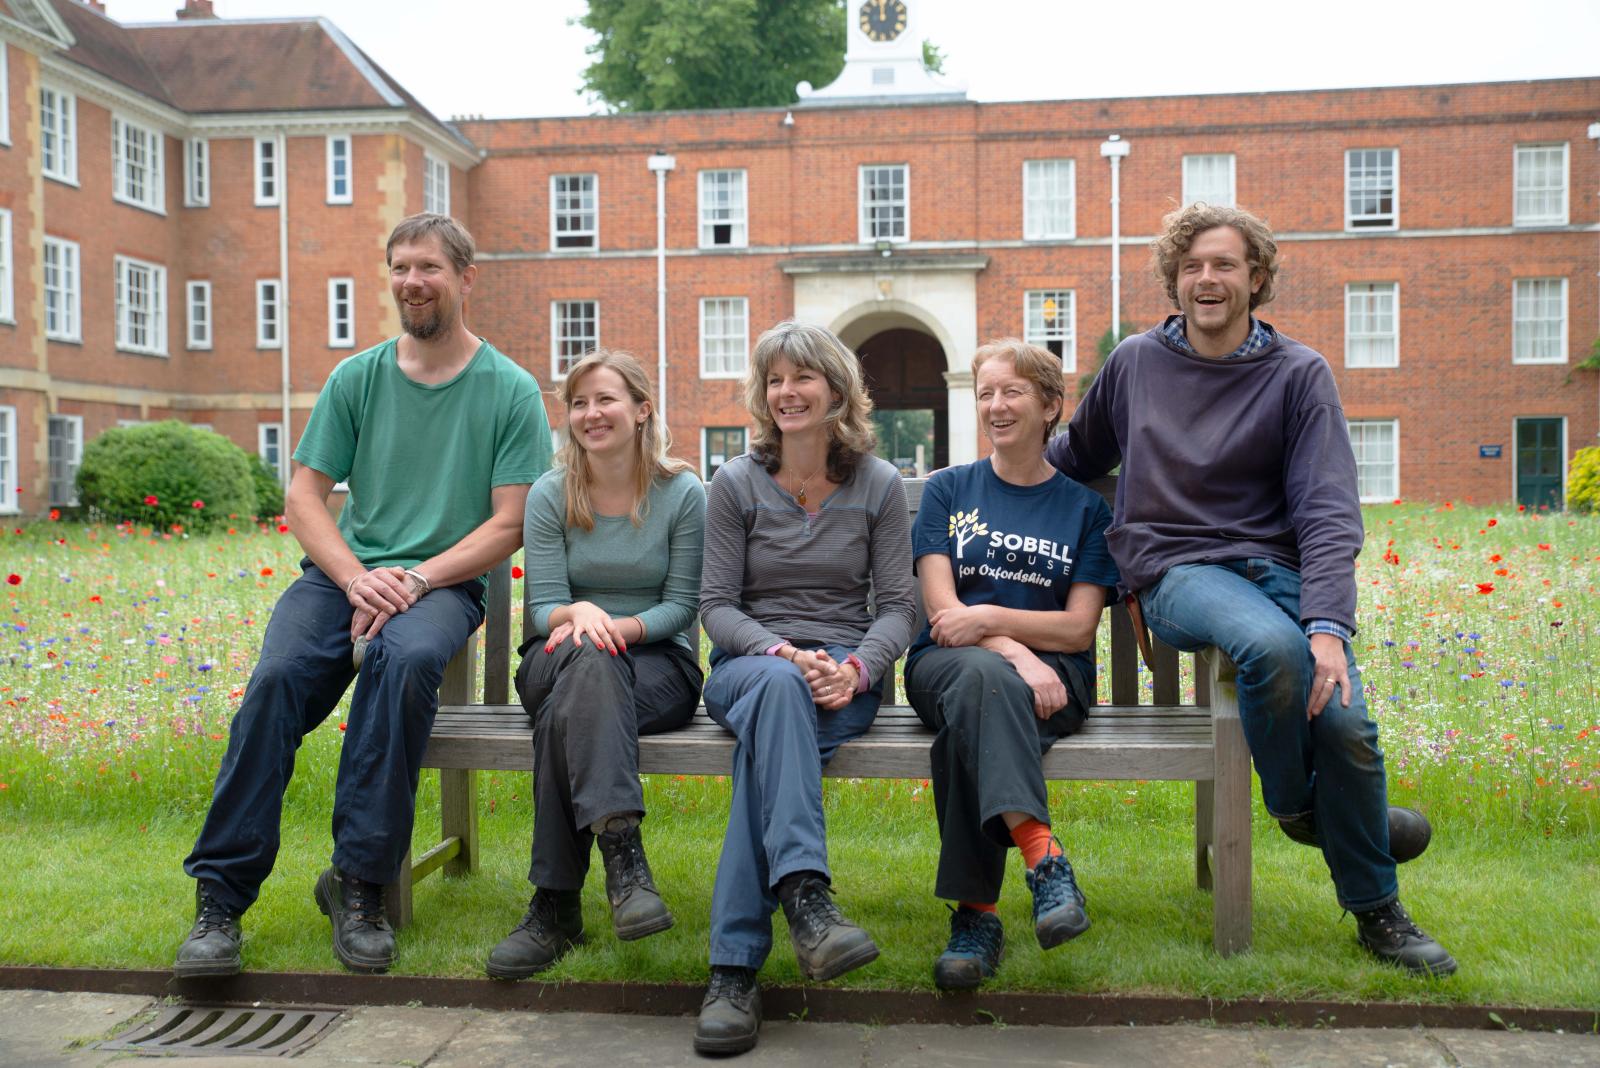 LMH Gardening Team sitting on bench in front of wild flower meadow in the quad